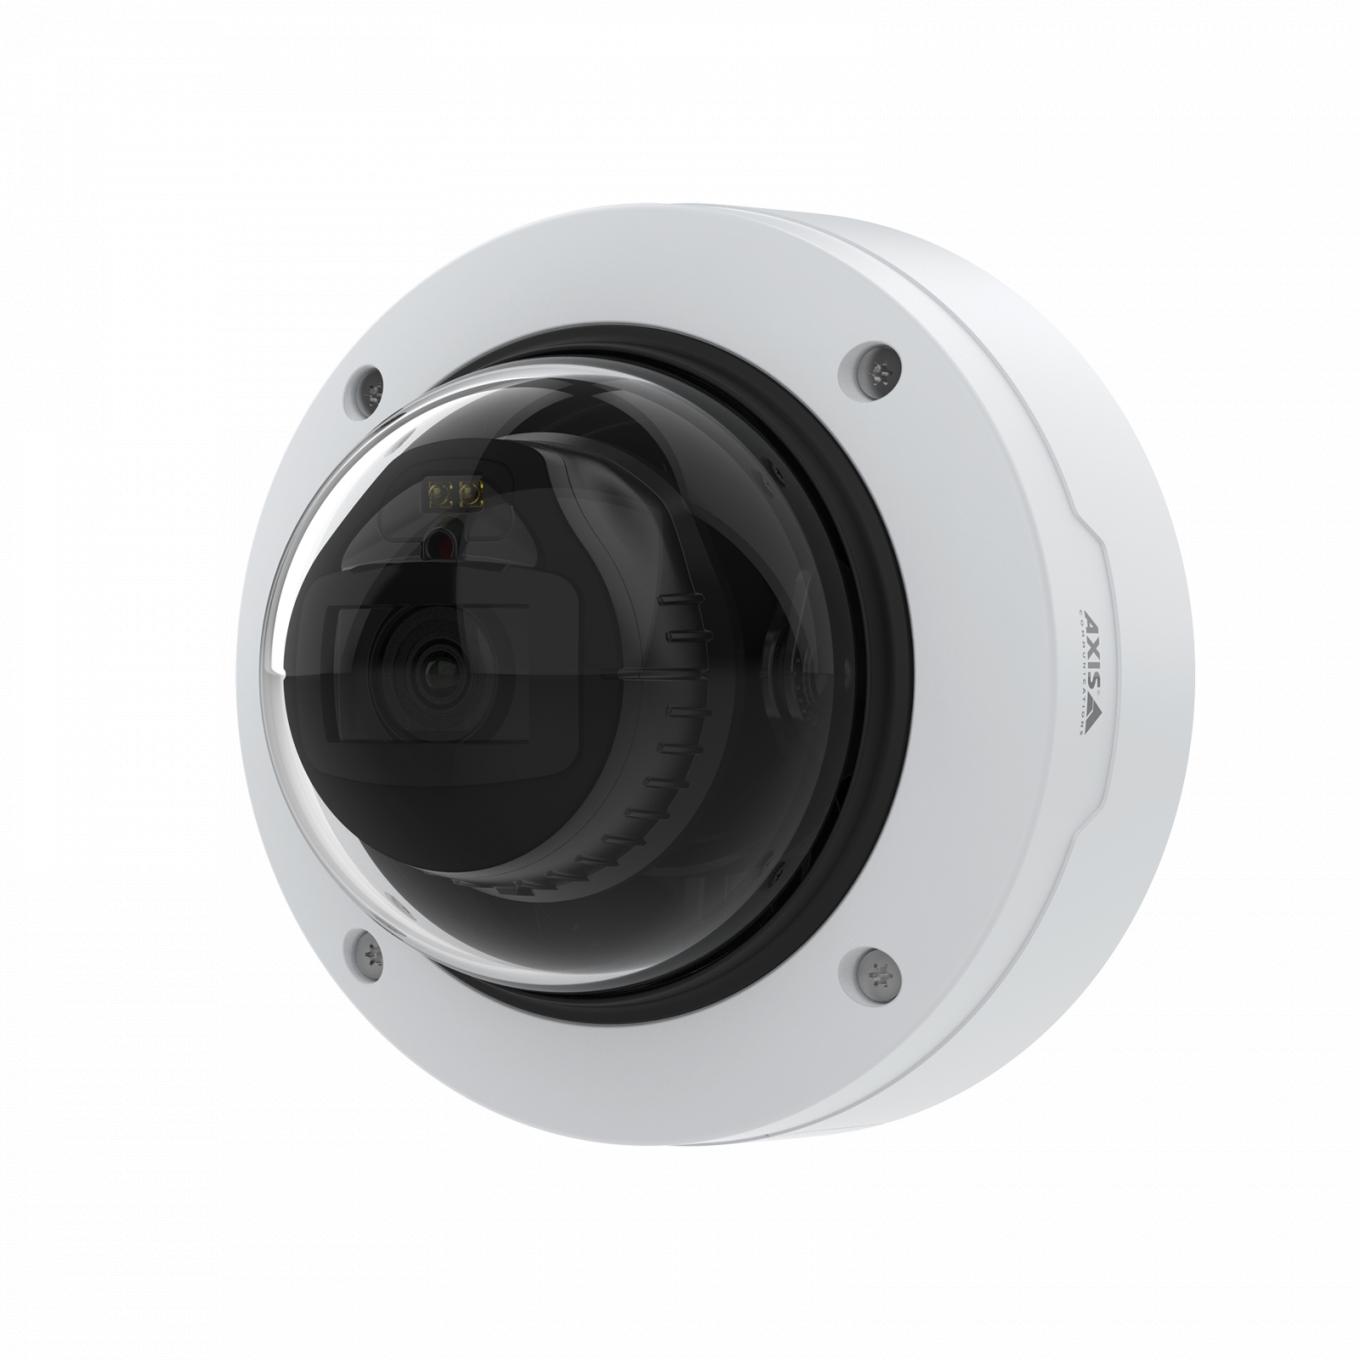 AXIS P3267-LV Dome Camera | Axis Communications